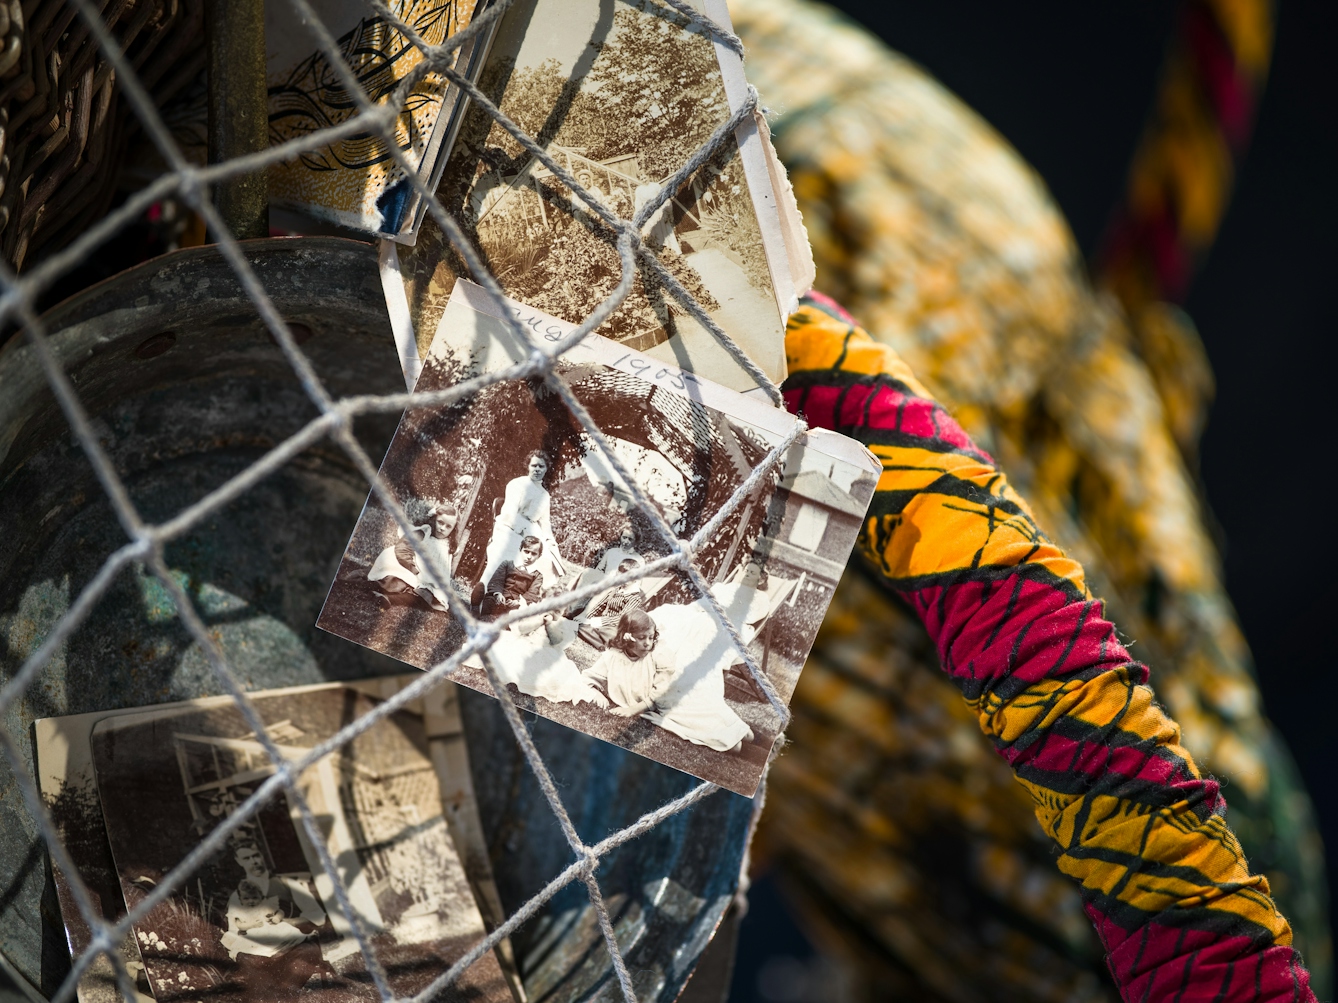 Photograph of a close-up detail of the net being carried by a life-size artwork of a figure resembling an astronaut. Within the net is a collection of black and white photographic prints showing family scenes from the early 20th century.